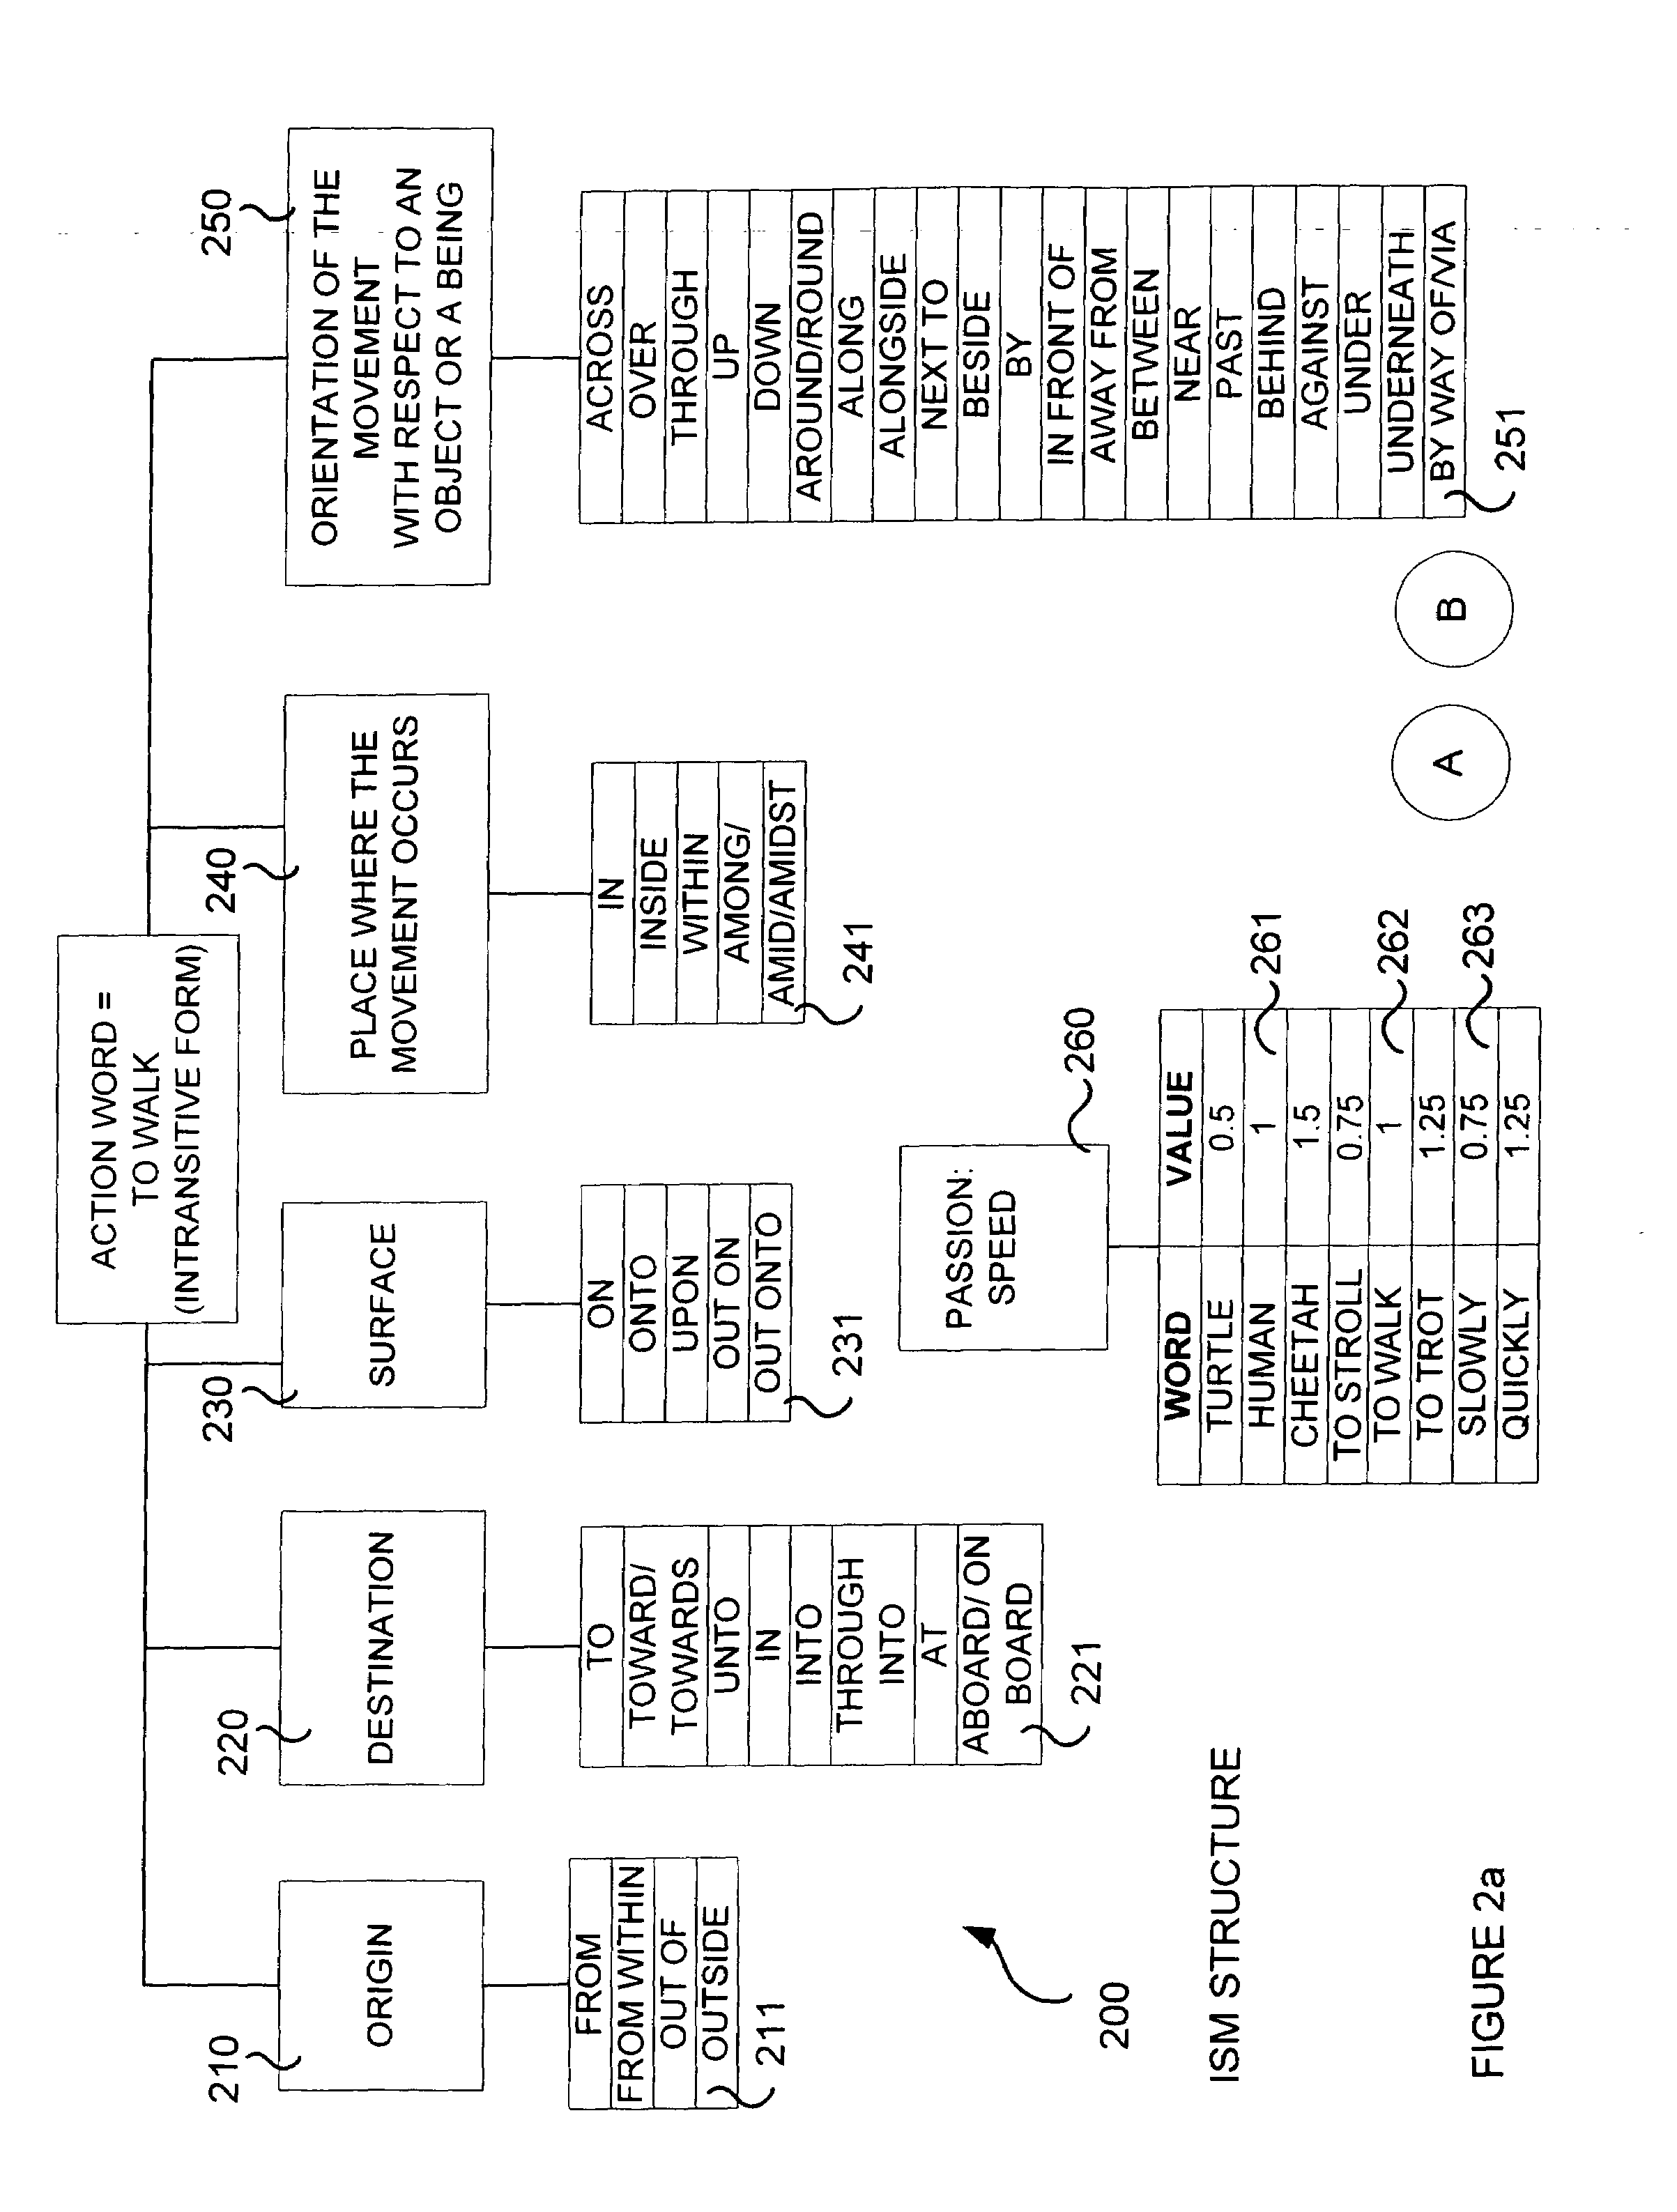 Method and system for mapping a natural language text into animation